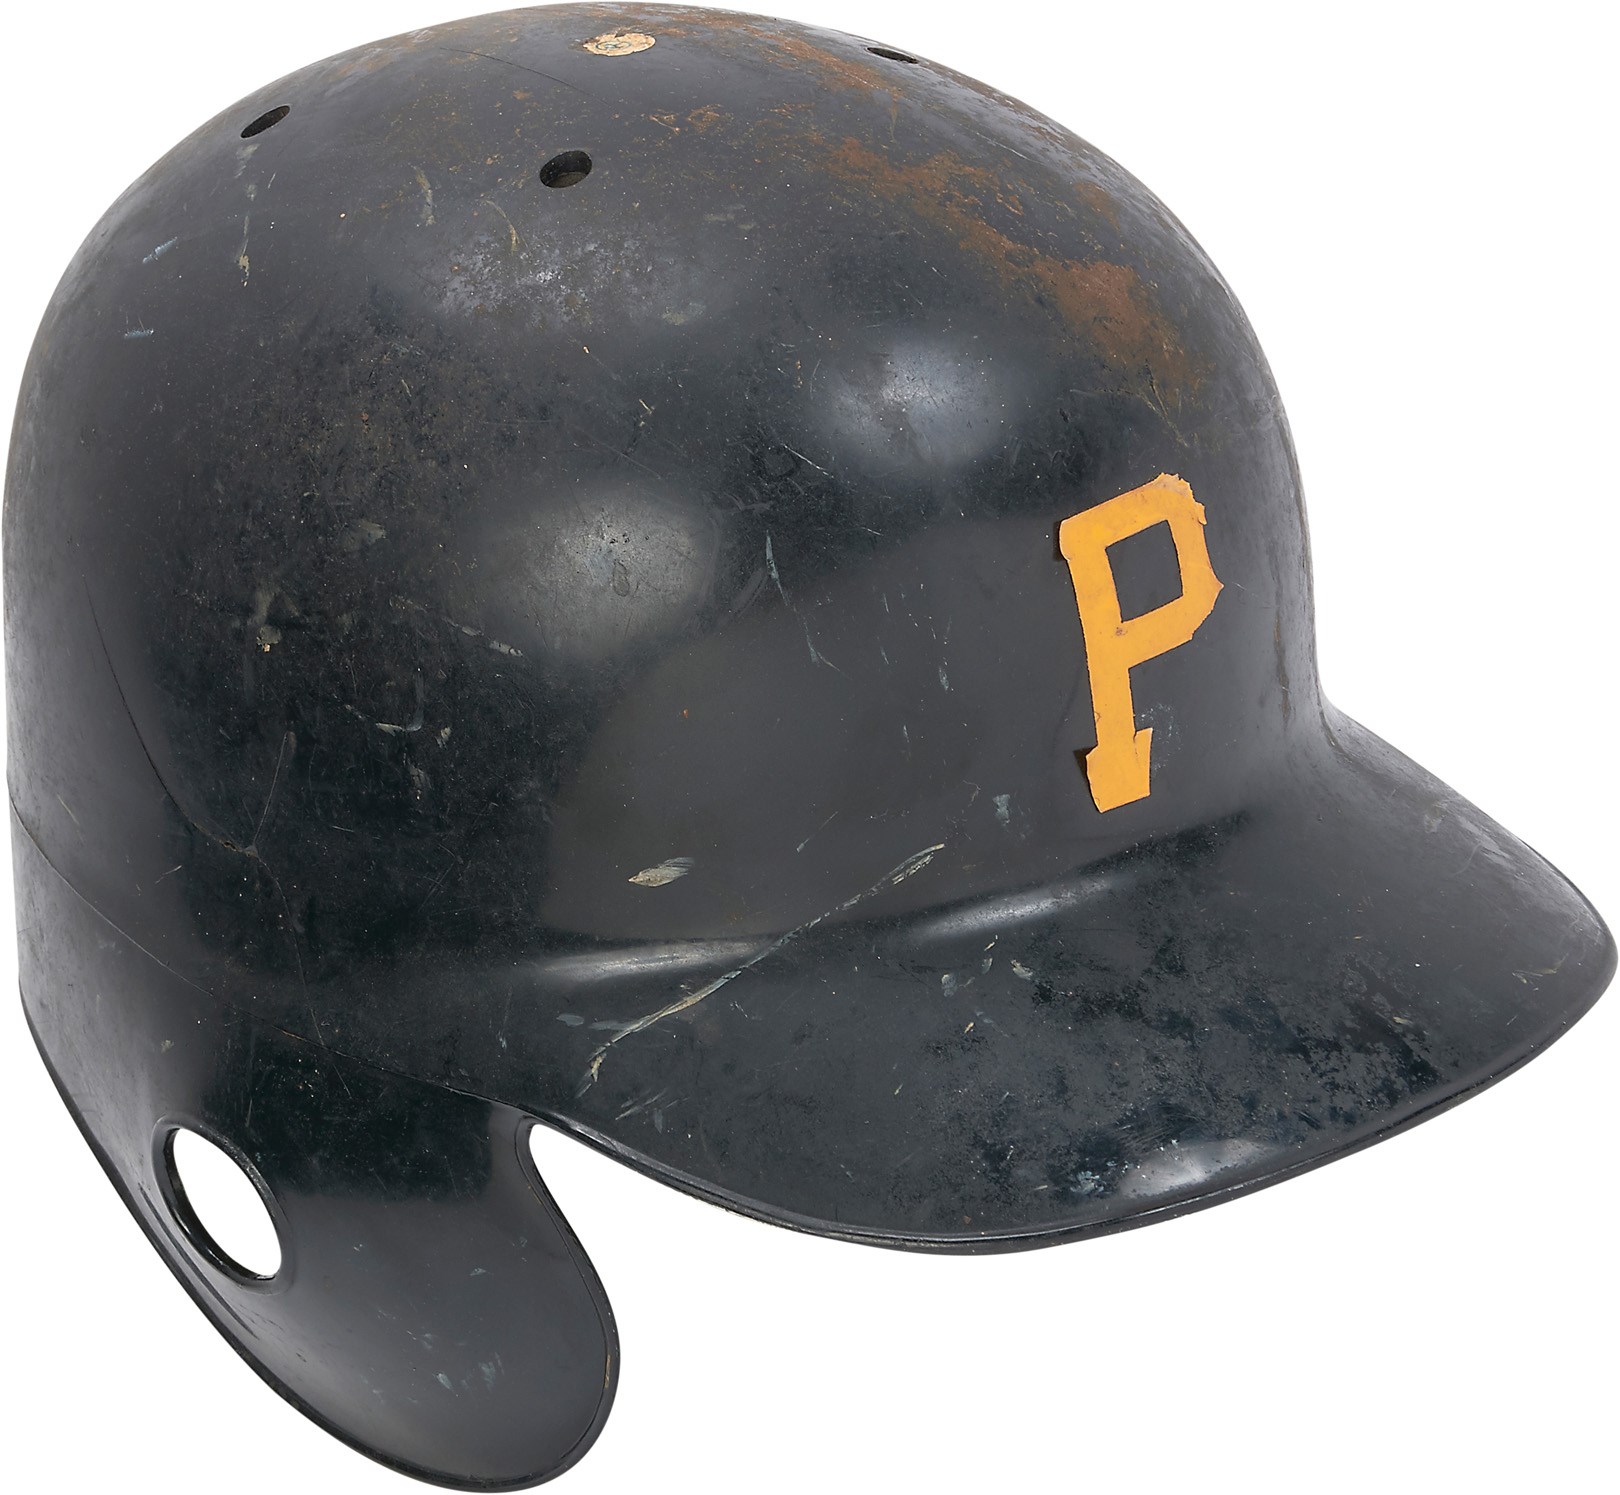 Clemente and Pittsburgh Pirates - Circa 1988 Barry Bonds Game Worn Pittsburgh Pirates Helmet